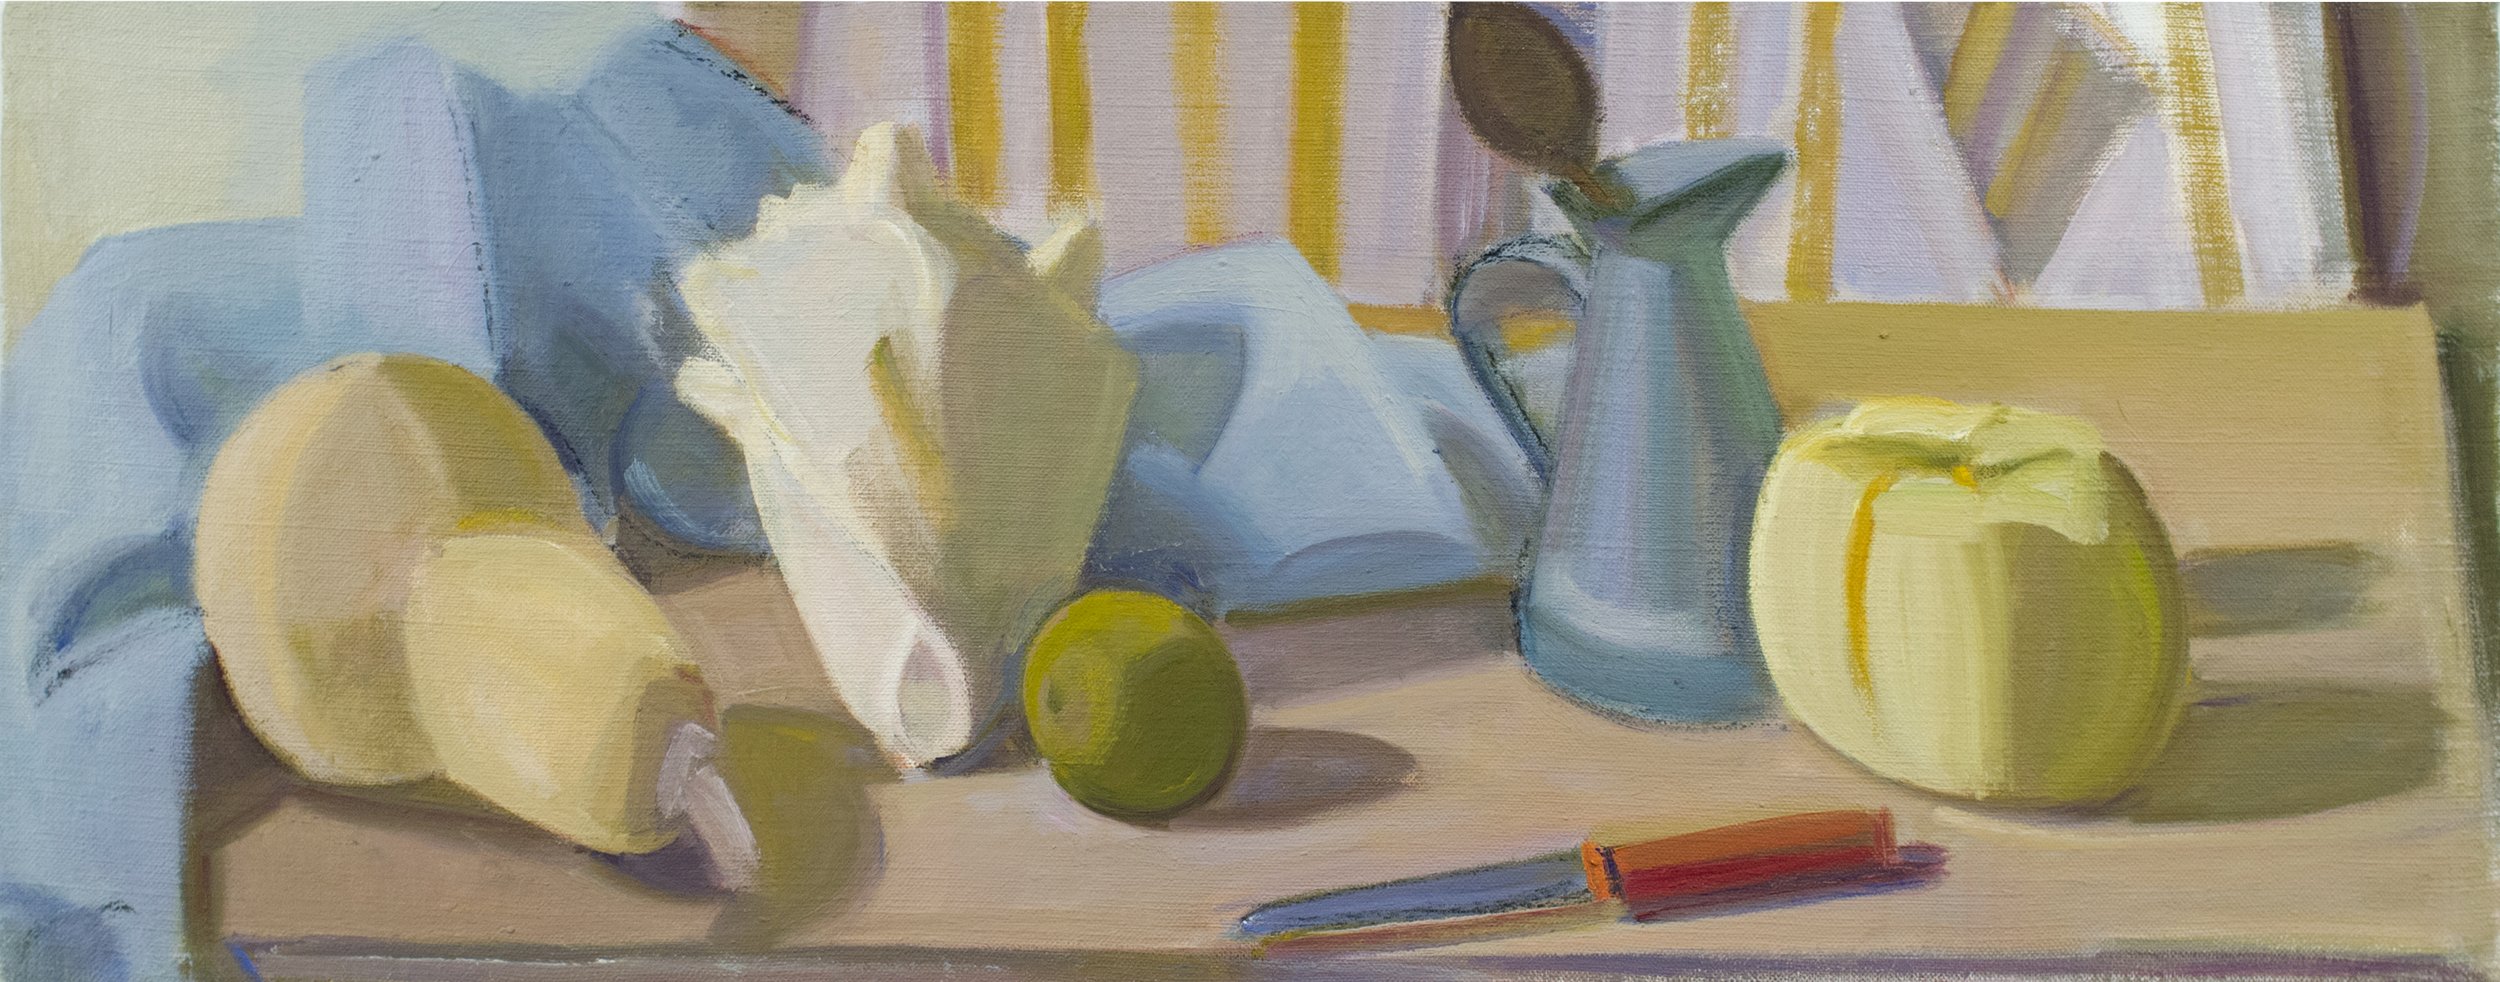   Butternut and Striped Squash with Shell , c. 2013-14, oil/canvas, 10 x 25 in. (Private collection) 